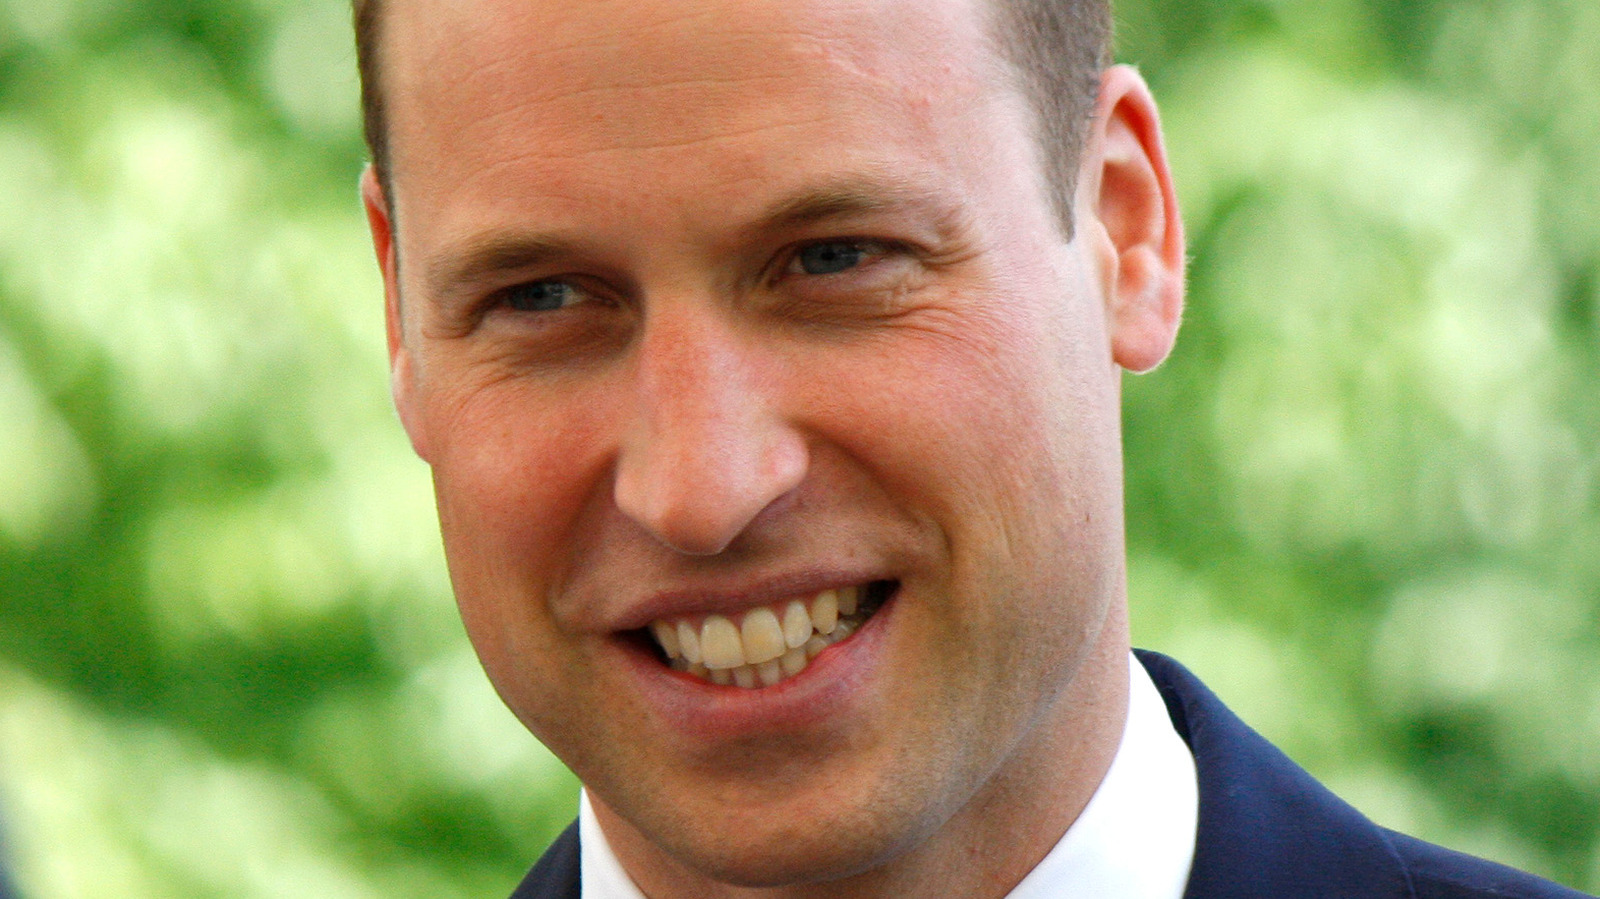 What Photos Are on Display in Prince William's Office